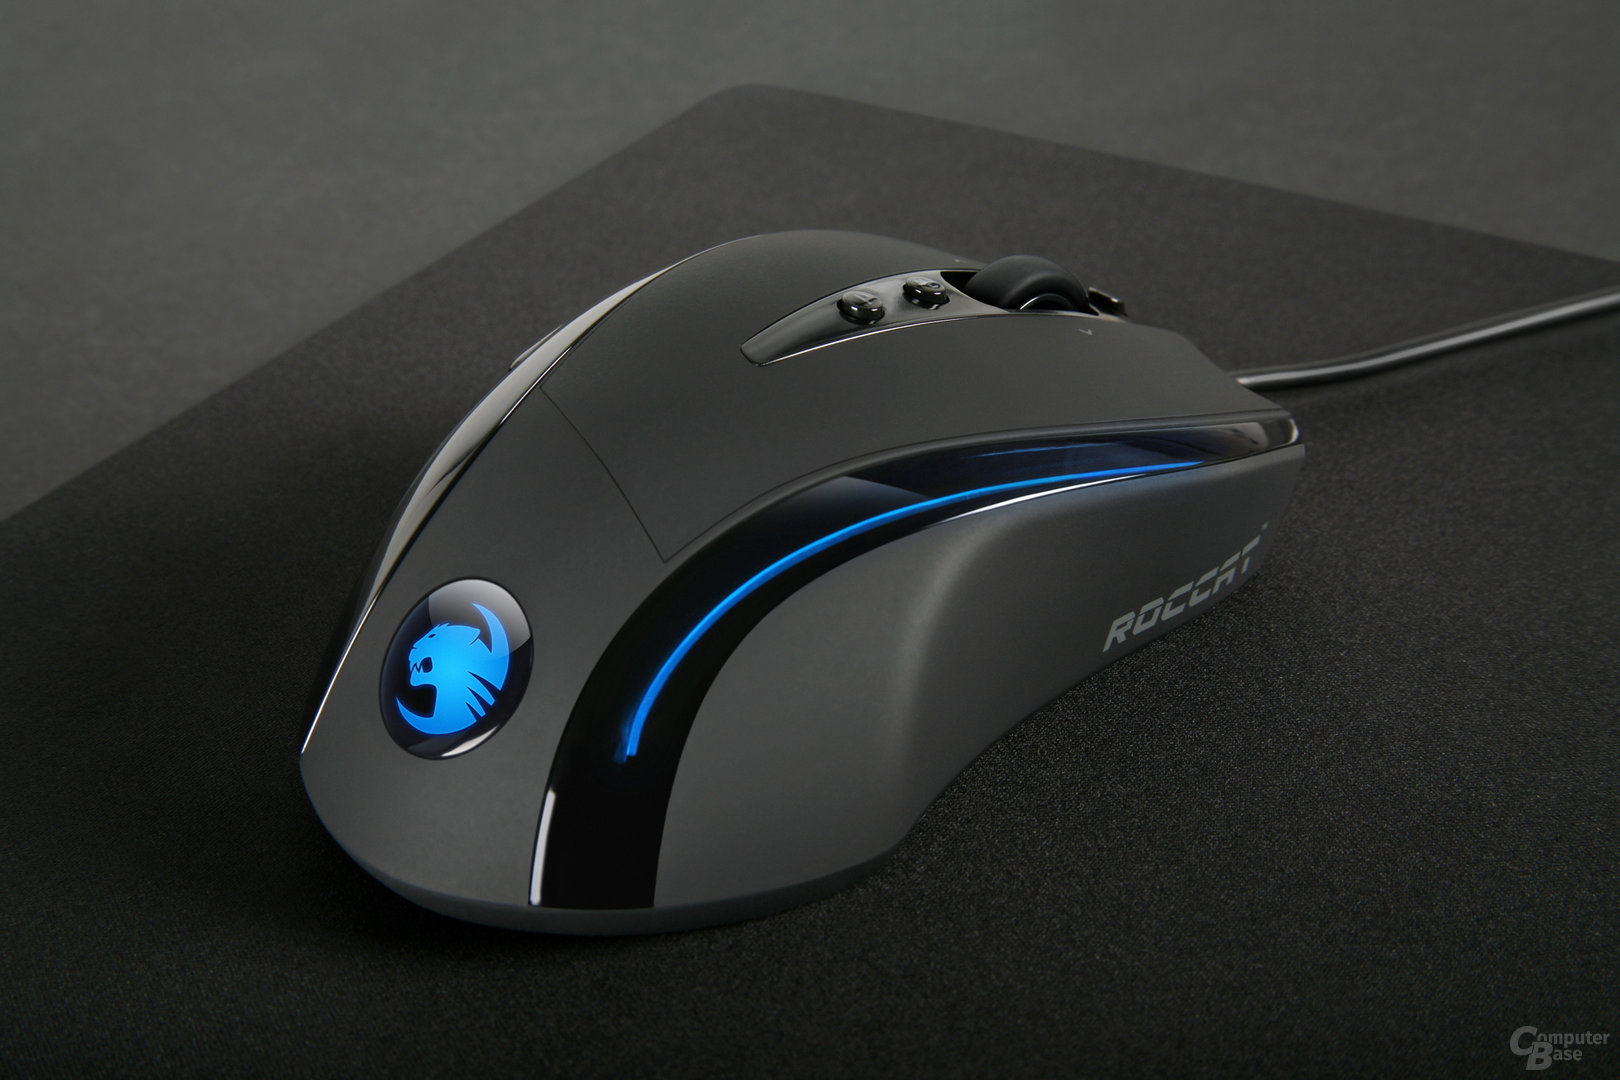 Roccat Kone Gaming Mouse